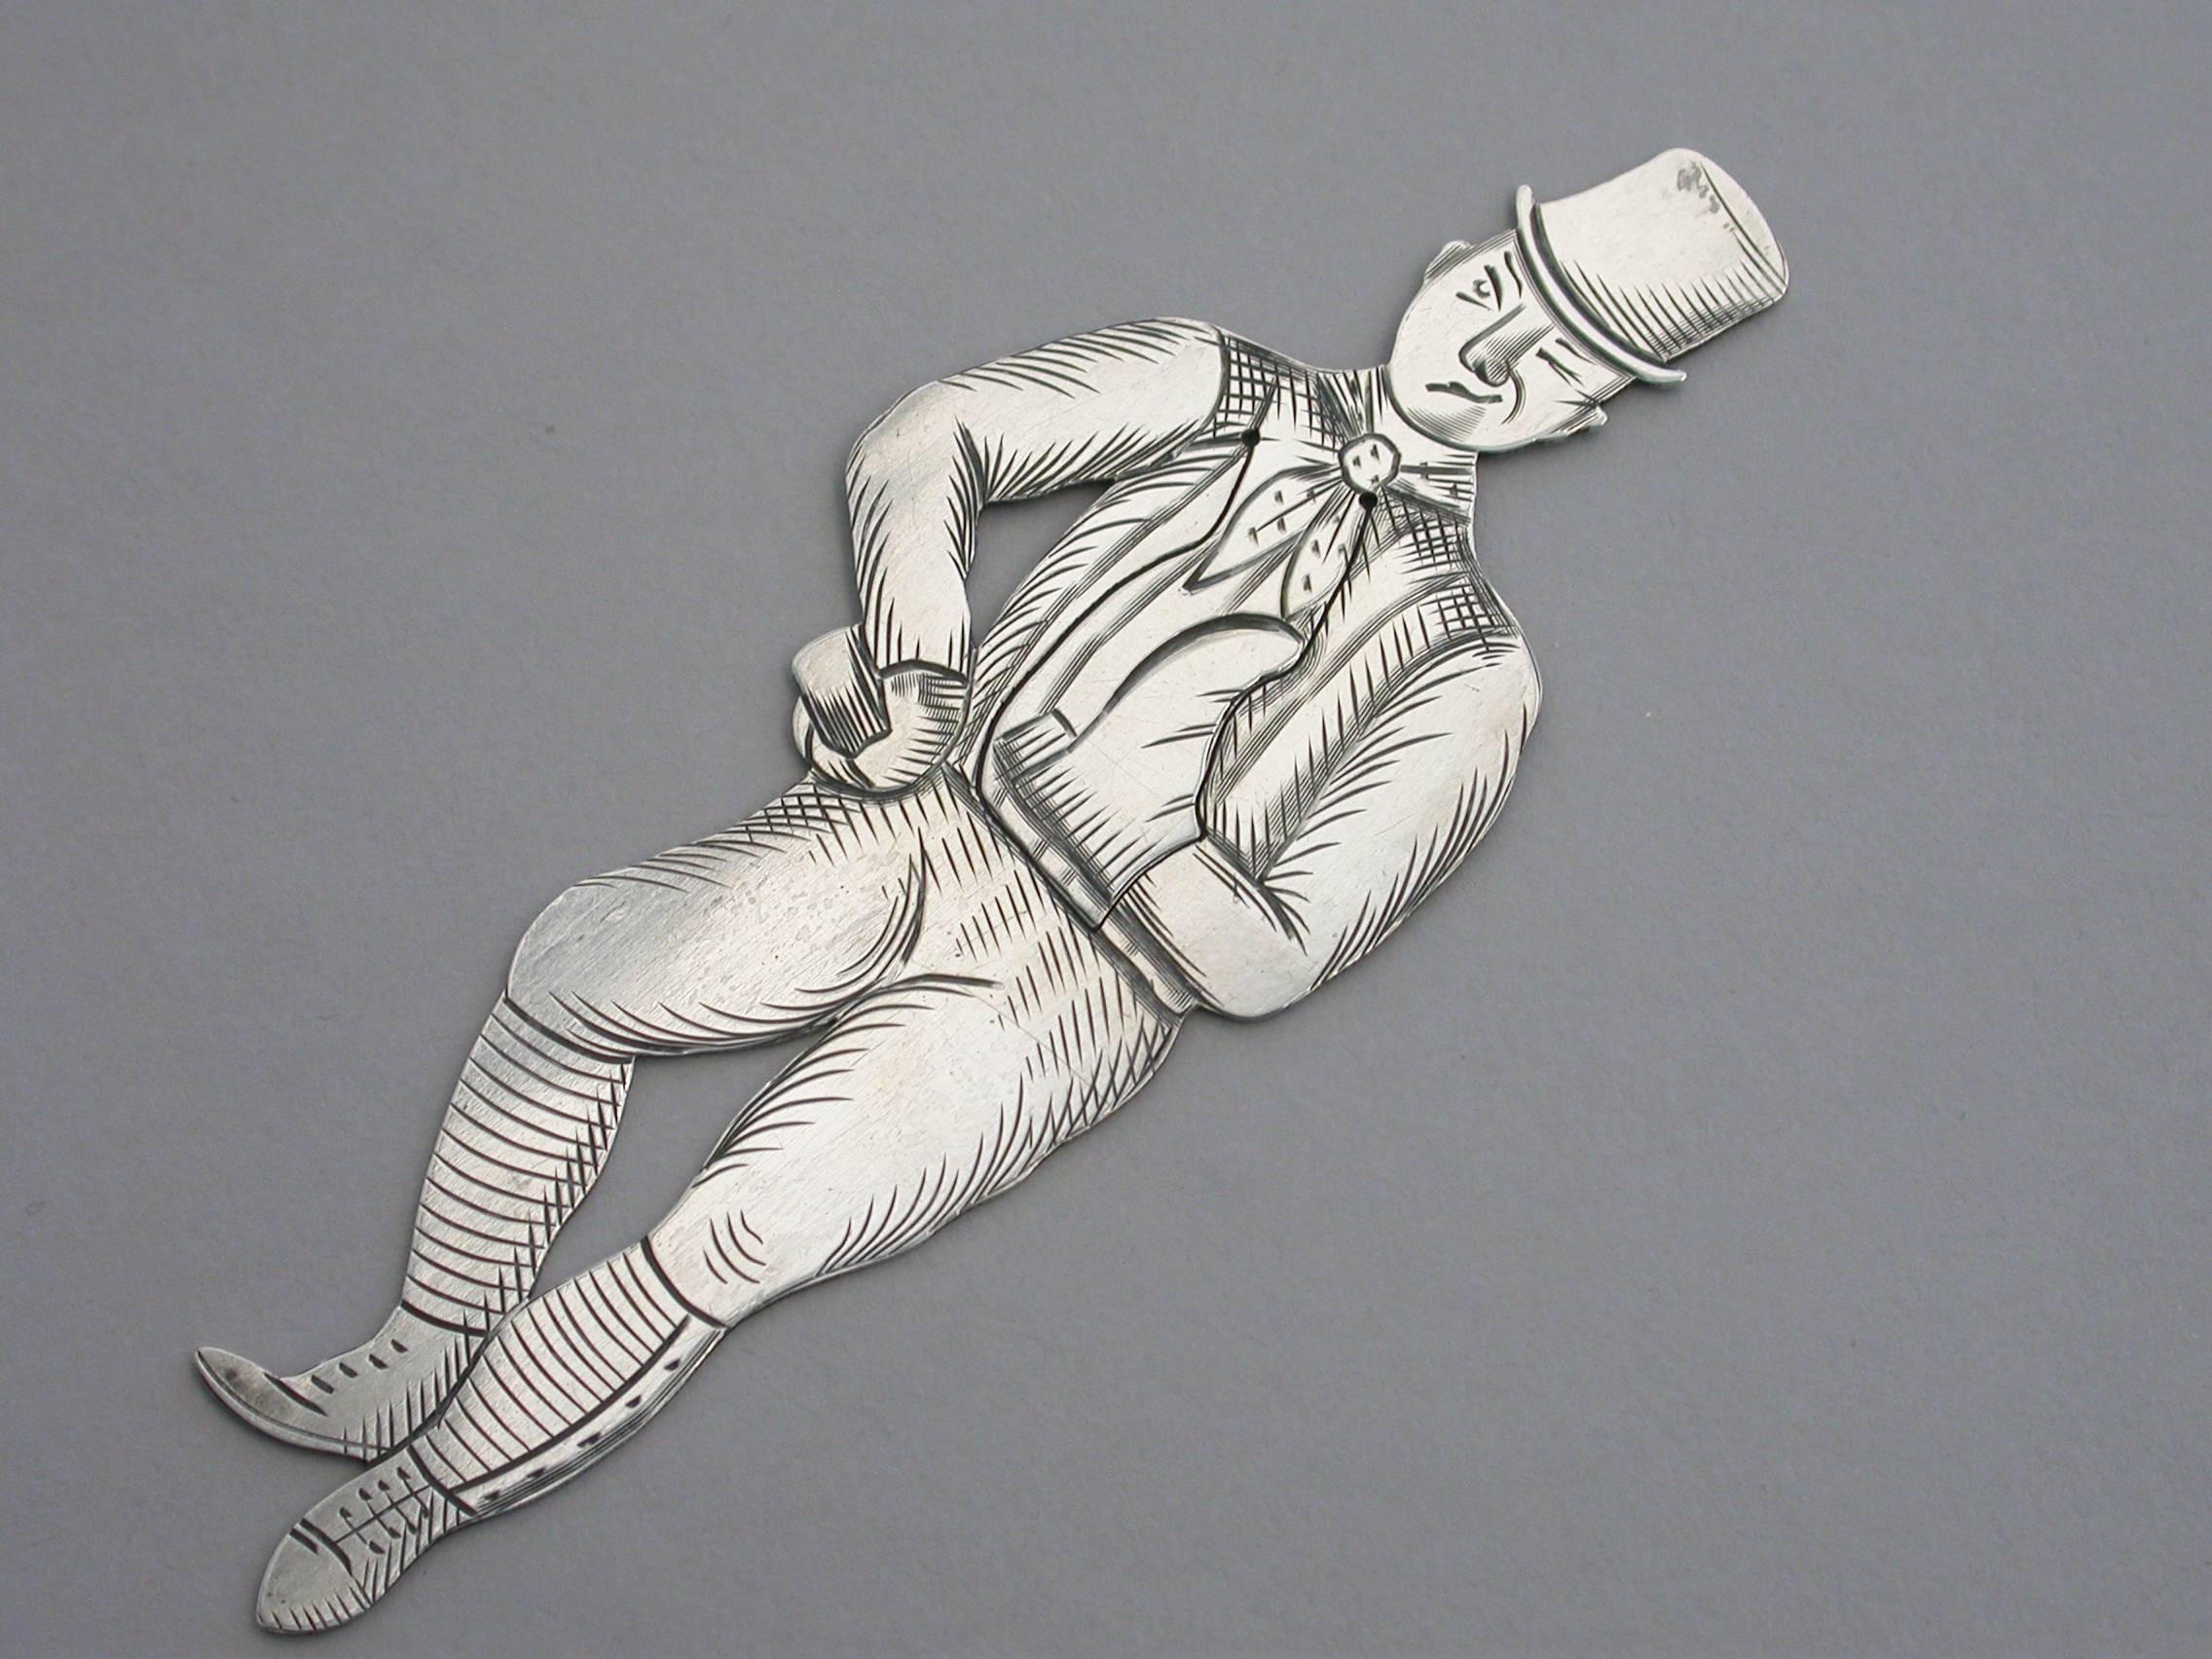 A rare early 20th century American novelty silver figural bookmark, depicting the character Sam Weller from the Charles Dickens novel, The Pickwick Papers.

By J F Fradley, New York, circa 1901-1910

In good condition with no damage or